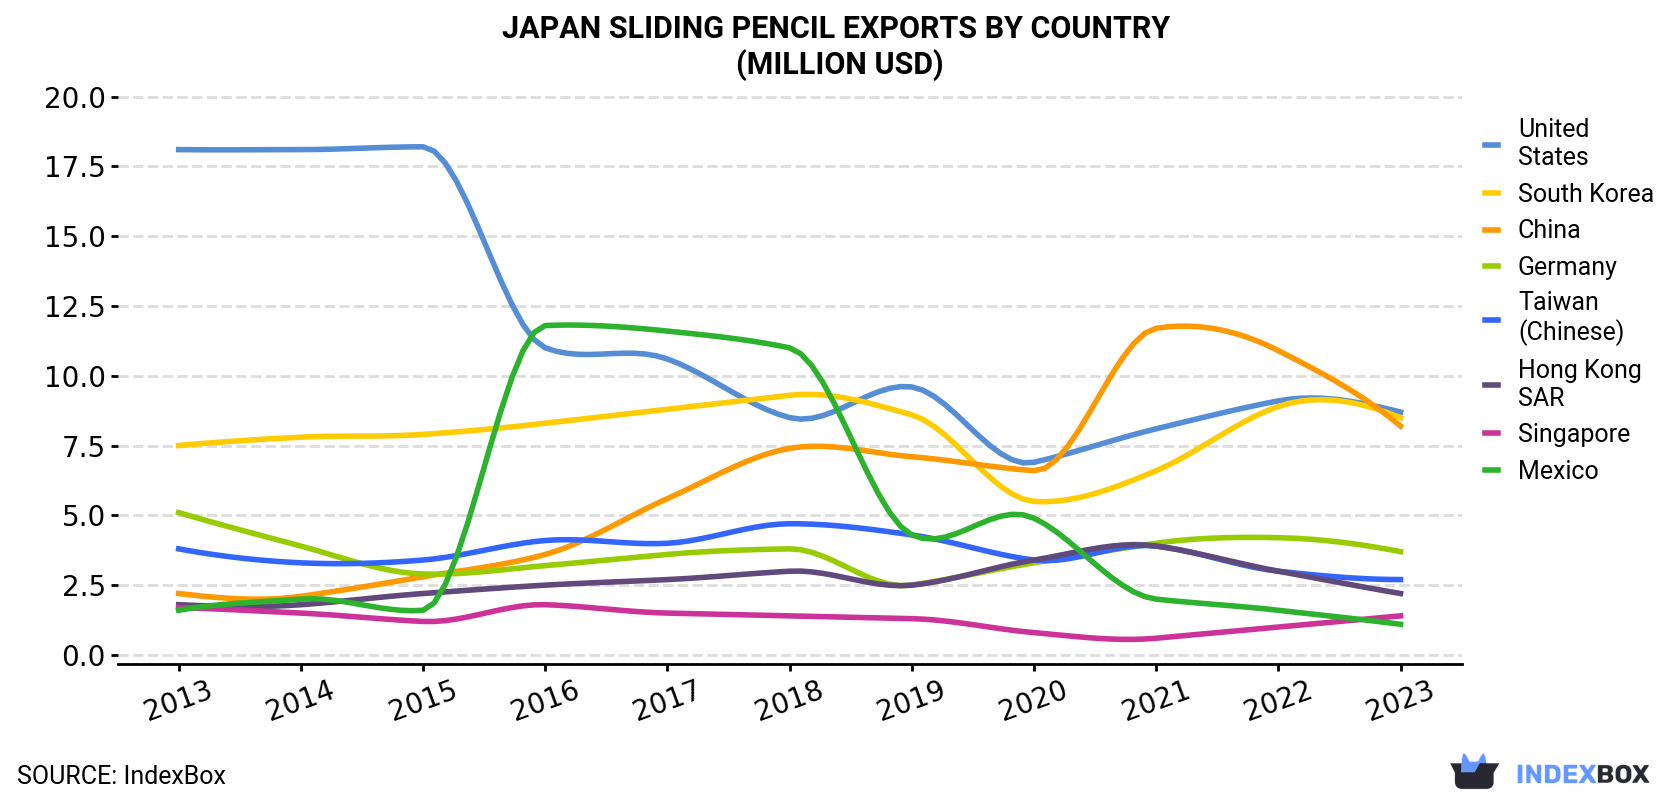 Japan Sliding Pencil Exports By Country (Million USD)